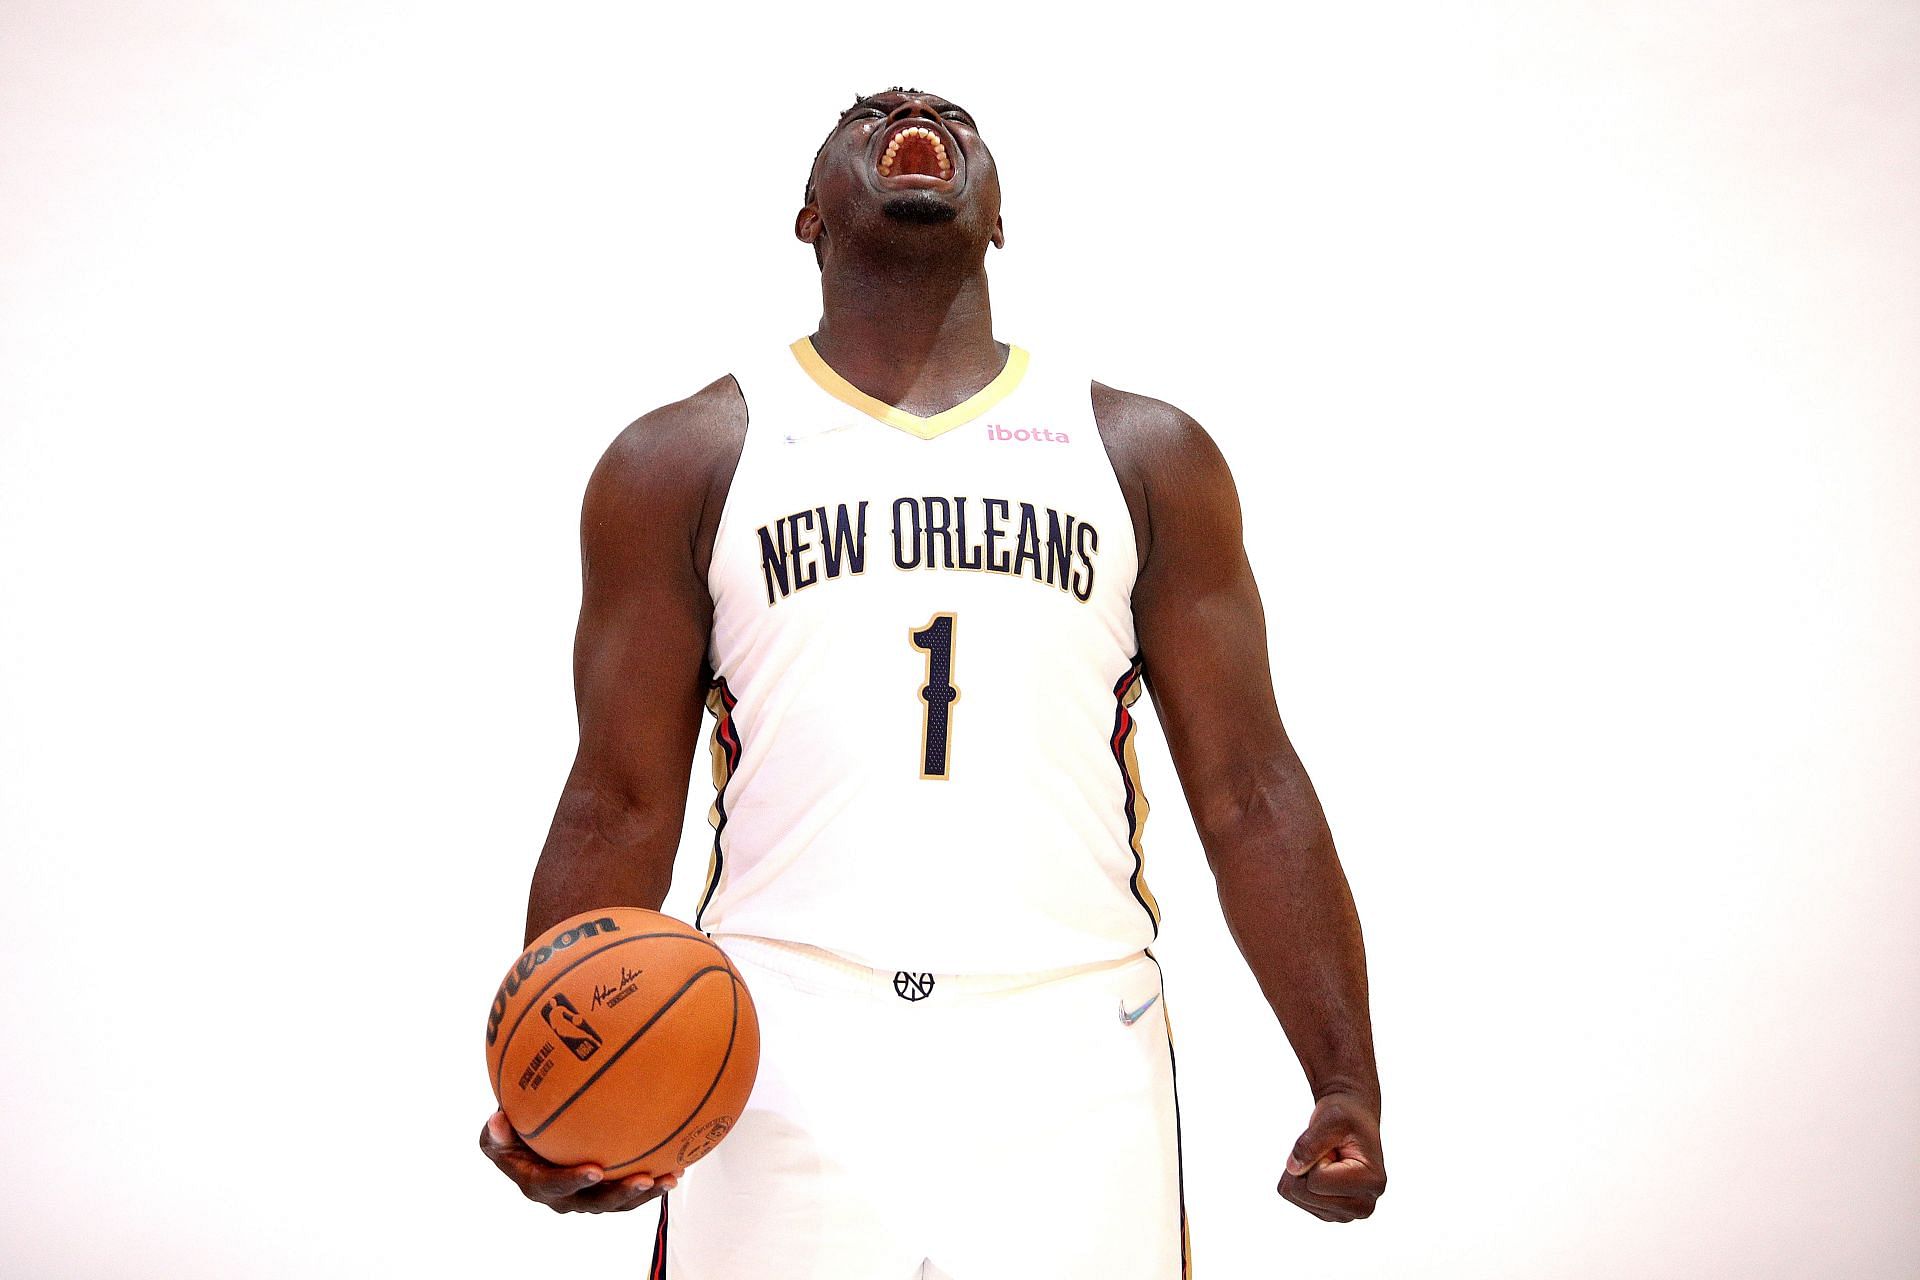 Zion Williamson at the 2021 New Orleans Pelicans Media Day